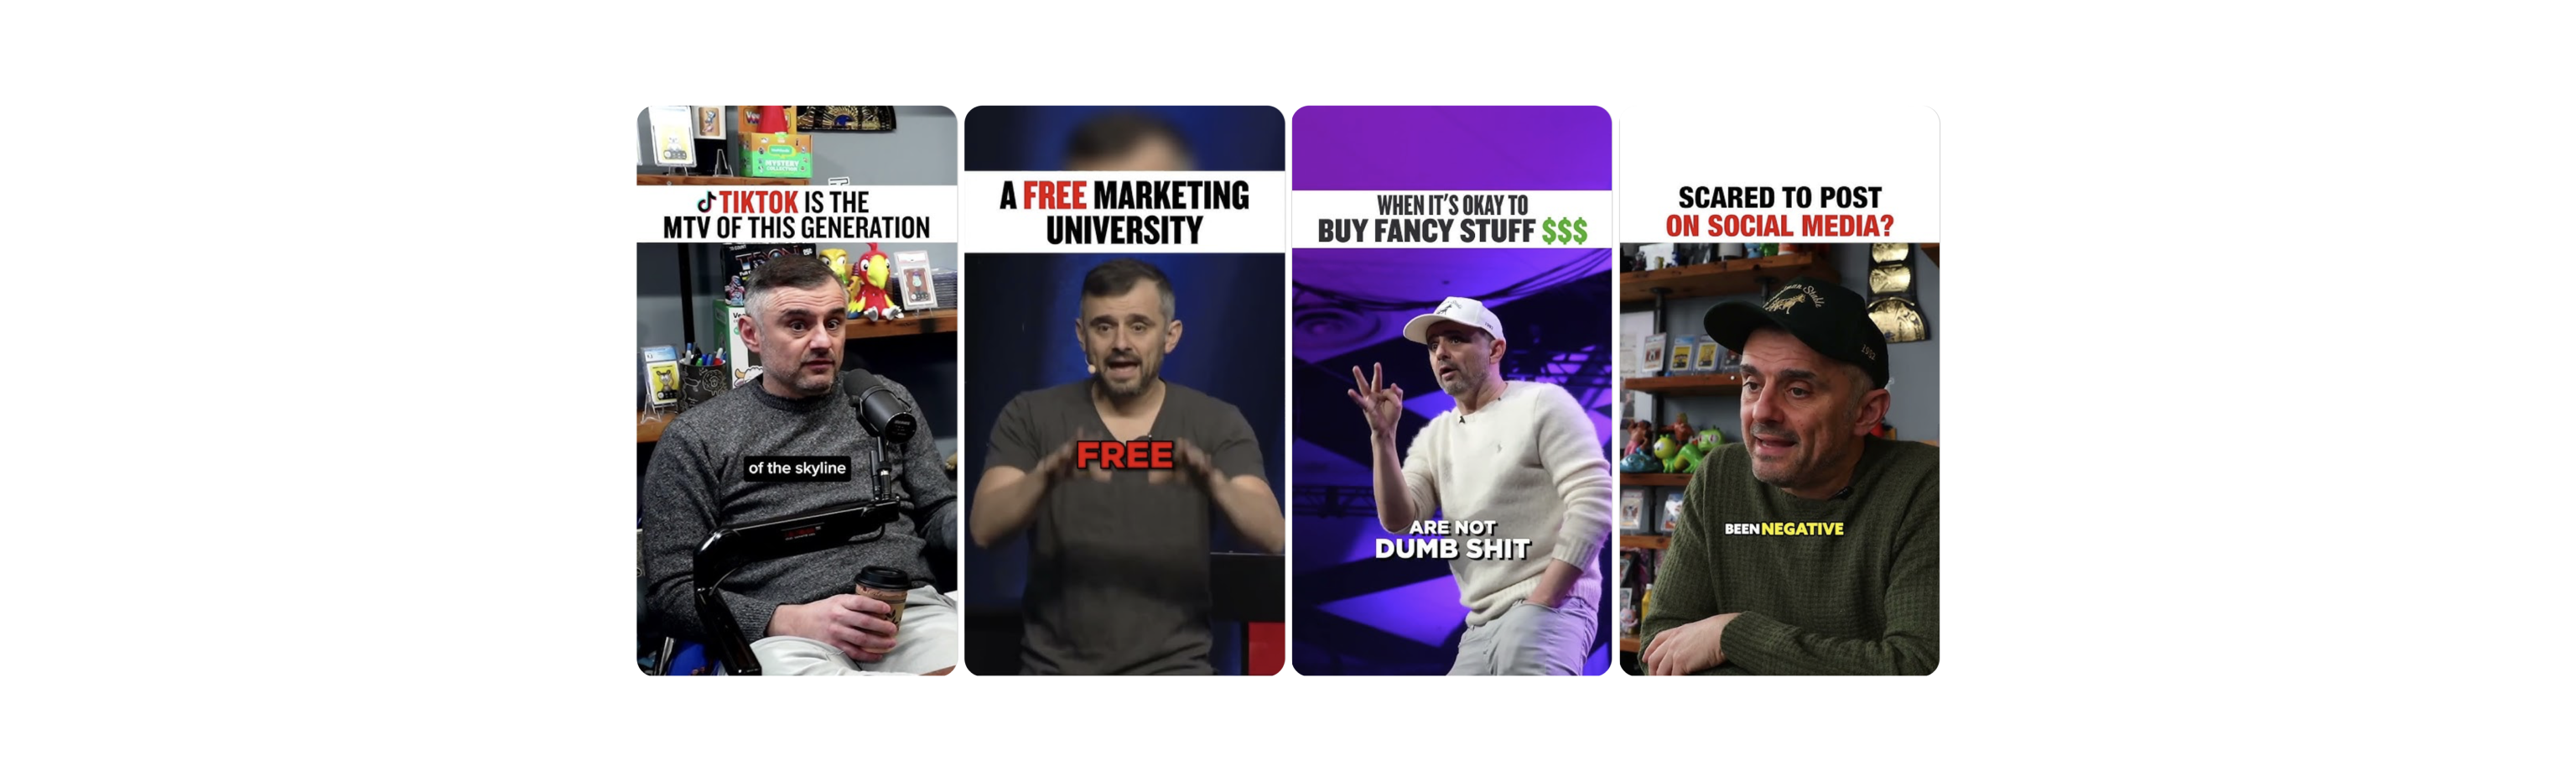 From Idea to Execution: Emulating GaryVee’s Video Style